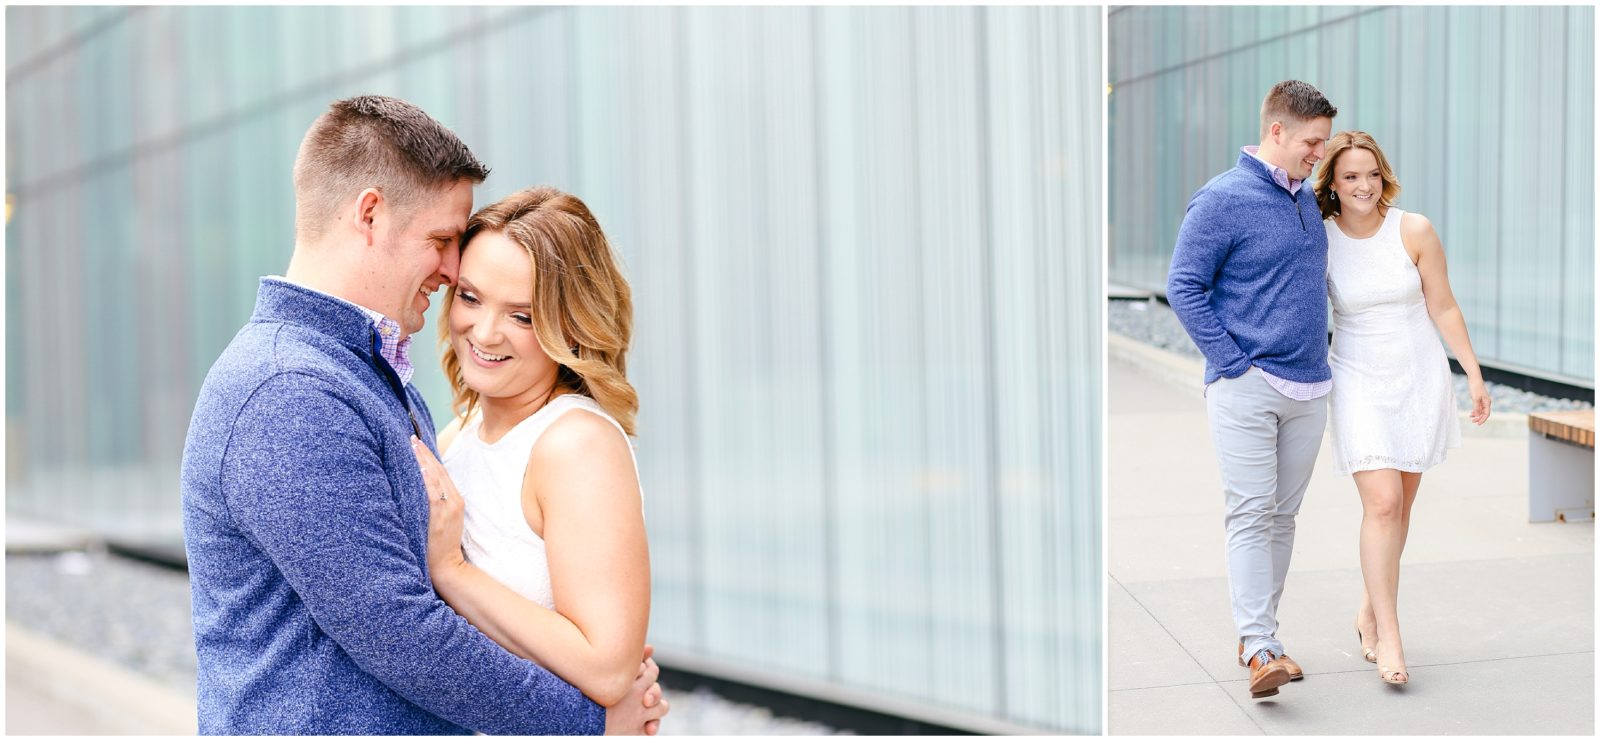 outdoor summer spring engagement photos - outfits on what to wear for an engagement session - kansas city wedding photography 